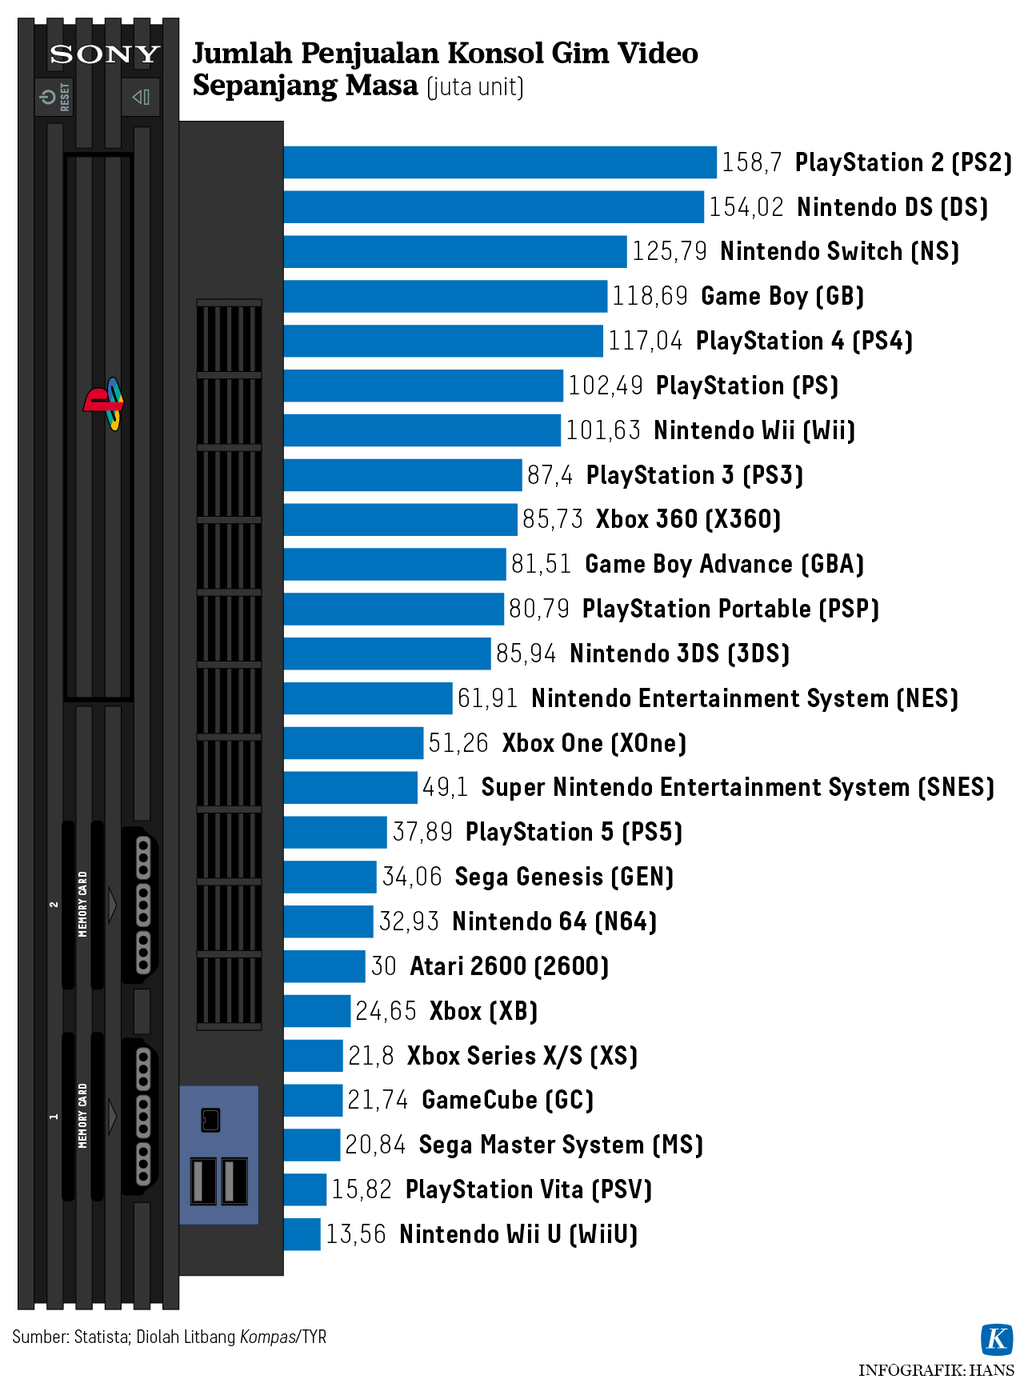 A List of the Top 10 Best Selling PlayStation 2 Games of All Time